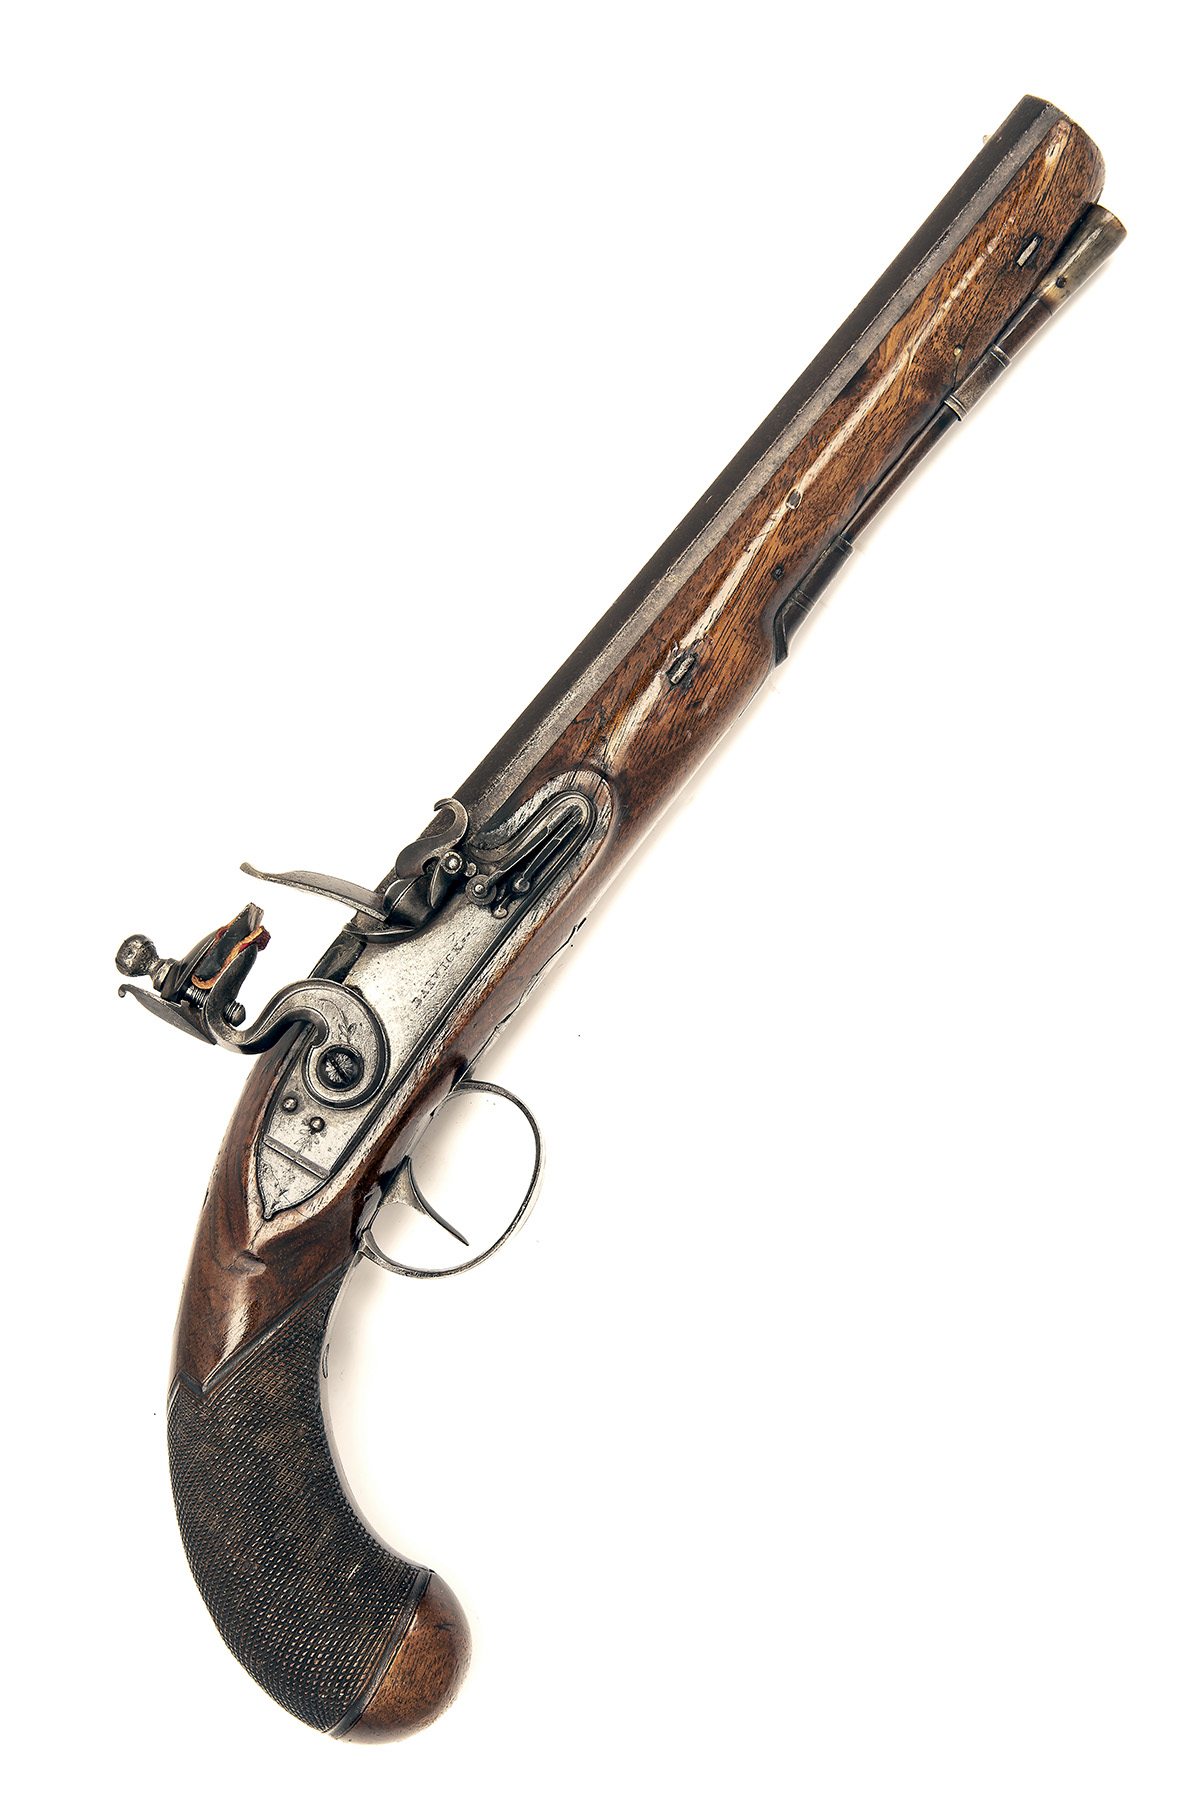 A 22-BORE FLINTLOCK DUELLING-PISTOL SIGNED BARWICK, no visible serial number, circa 1800, with